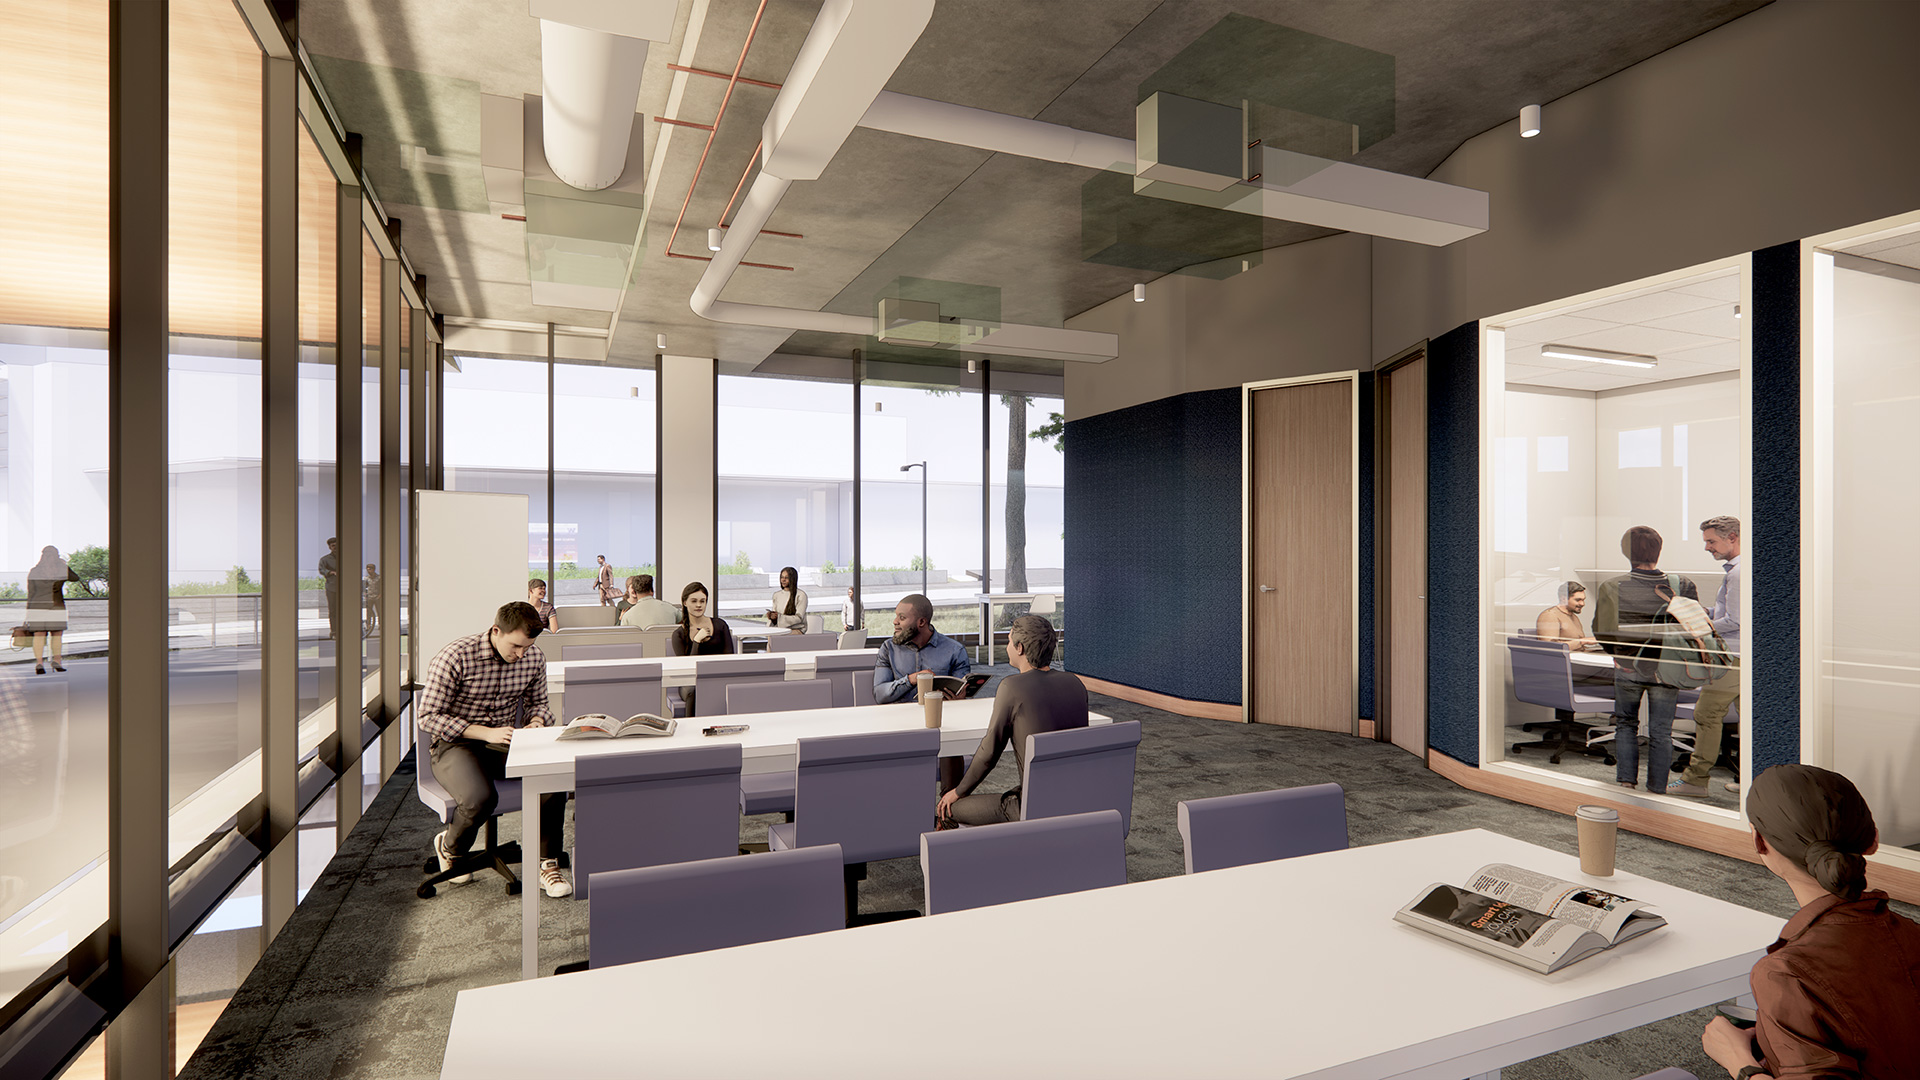 Student lounge rendering